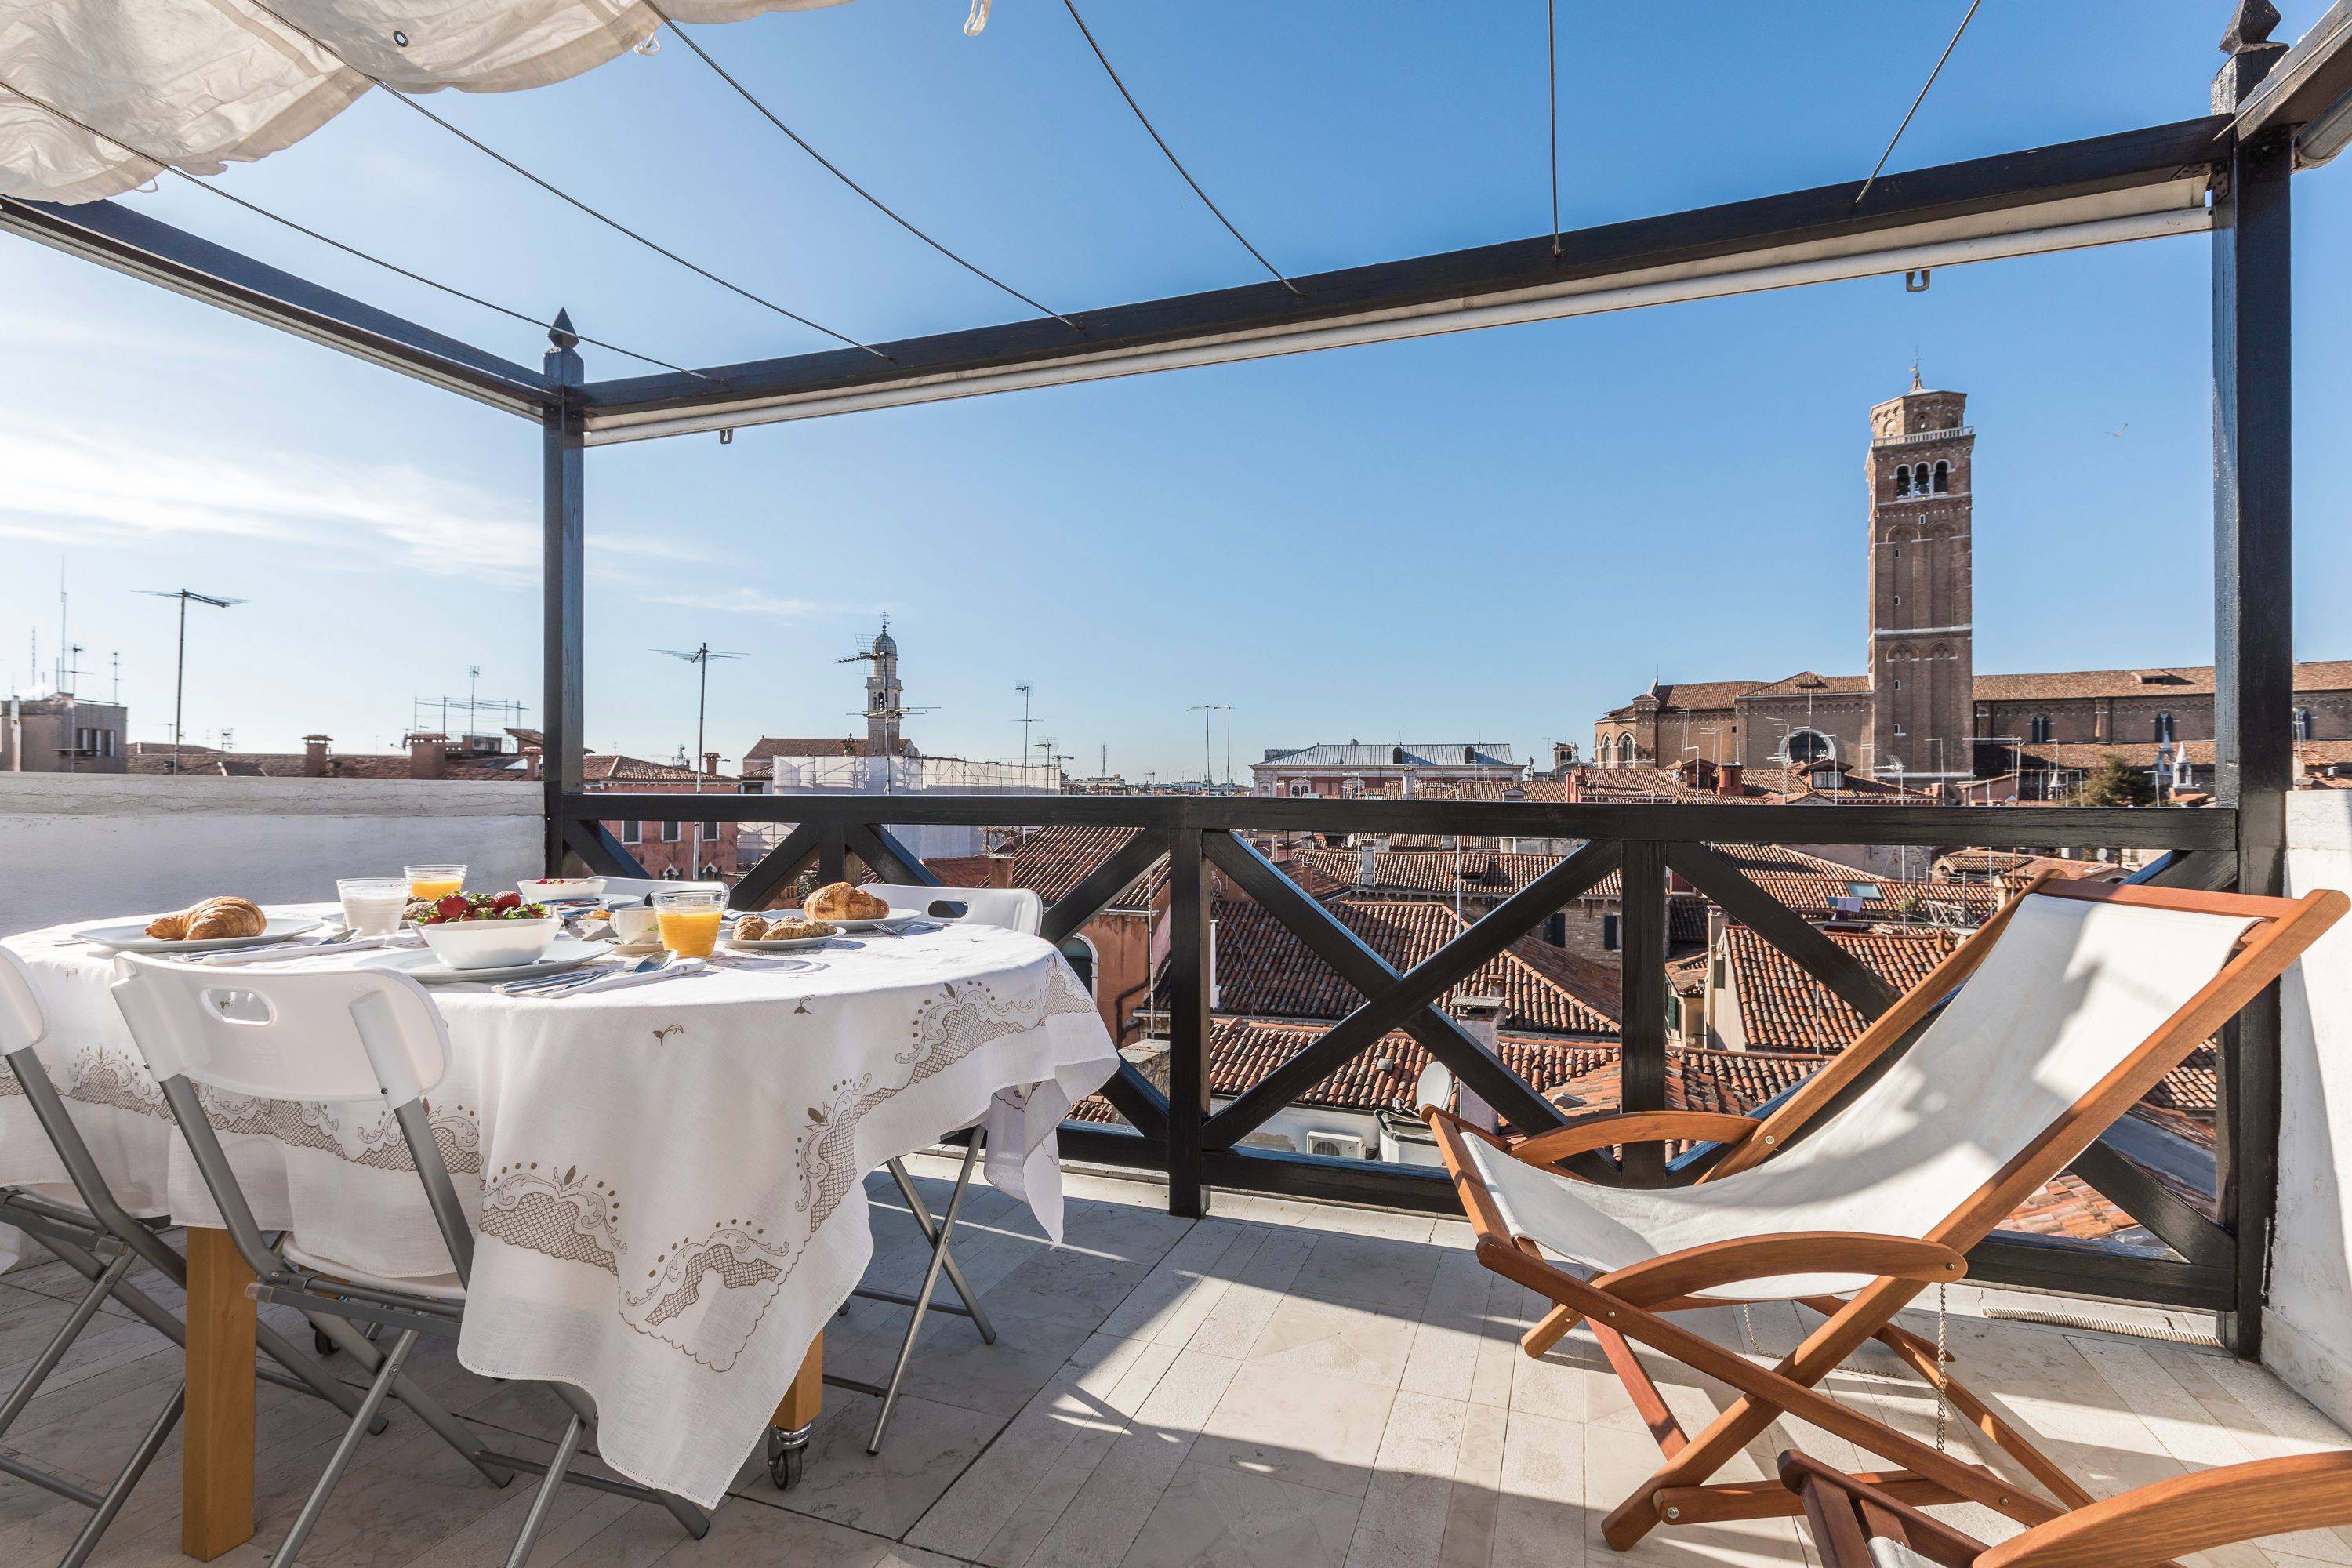 the terrace is spacious enough to be used as a sundeck or as a open-air dining room